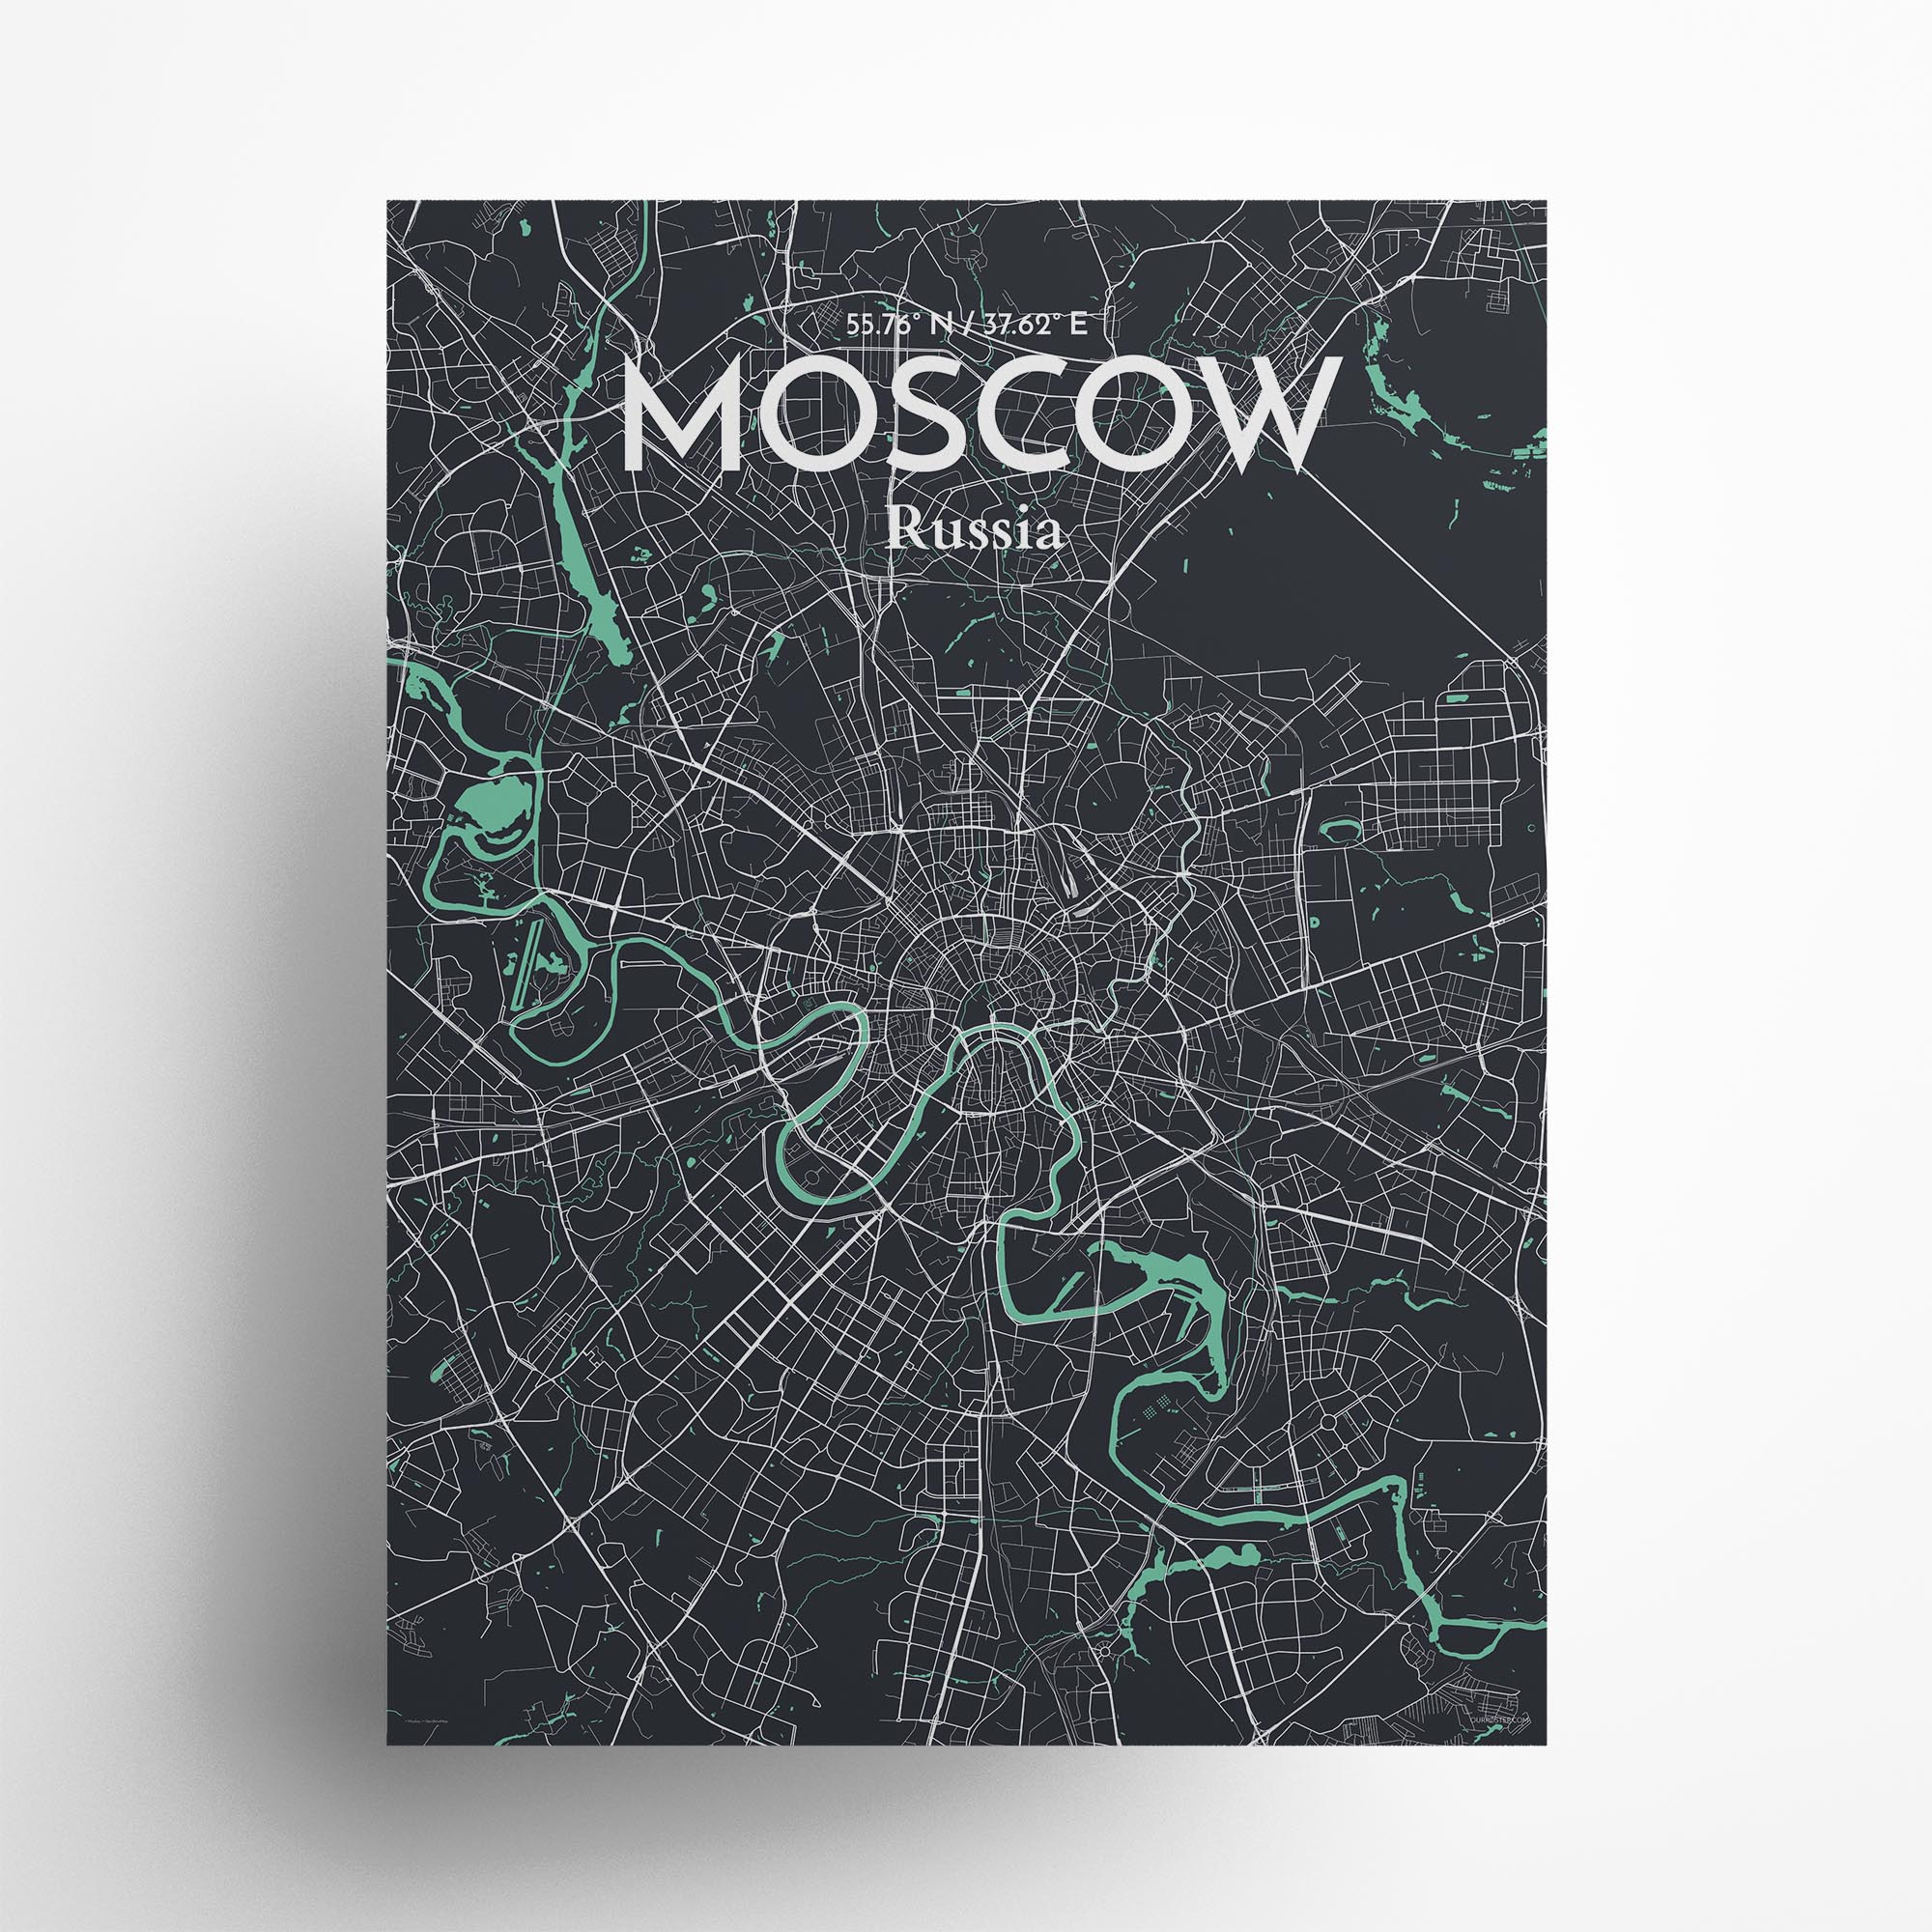 Moscow city map poster in Dream of size 18" x 24"